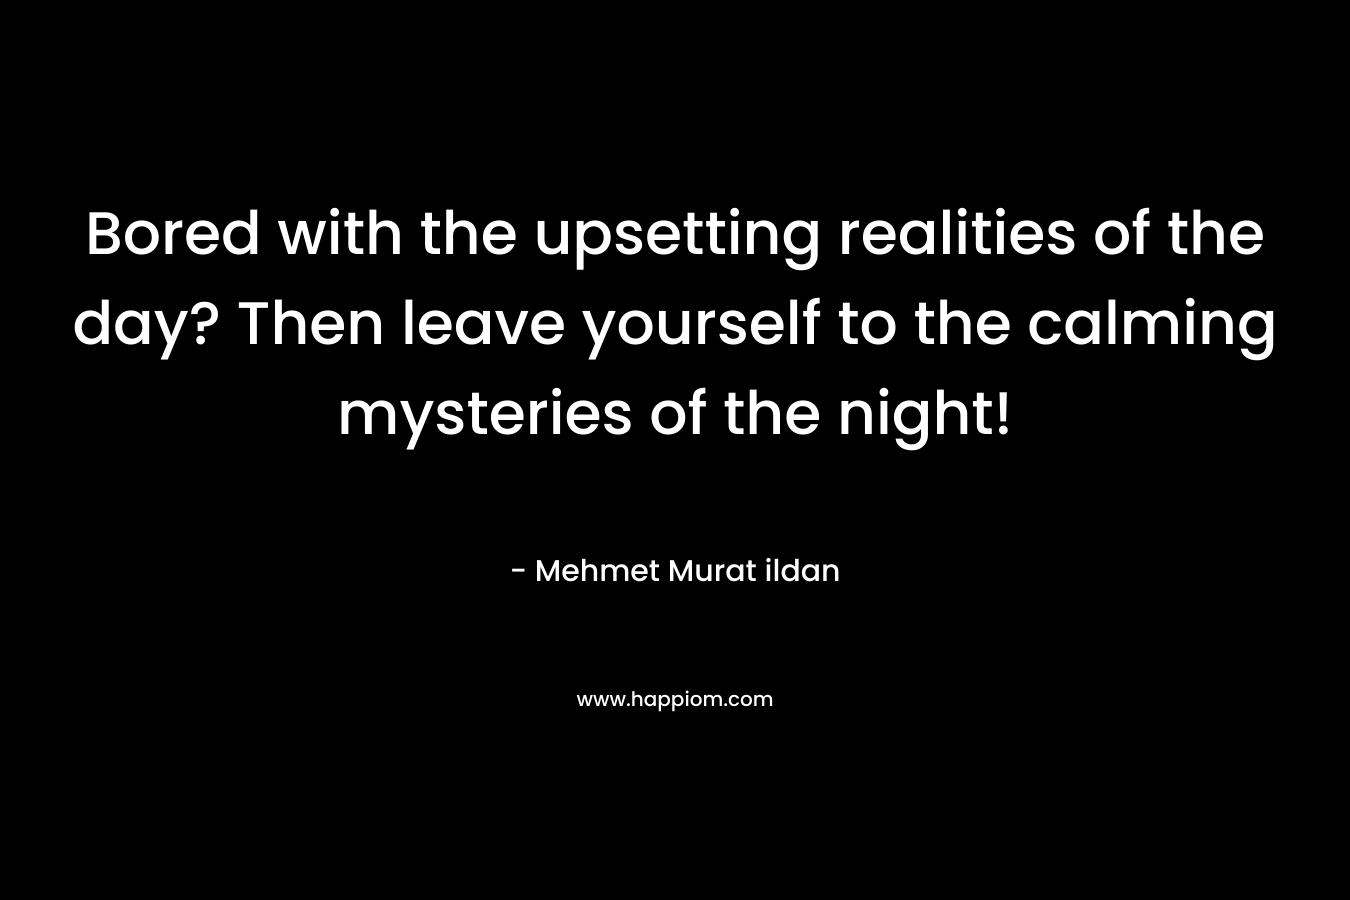 Bored with the upsetting realities of the day? Then leave yourself to the calming mysteries of the night! – Mehmet Murat ildan